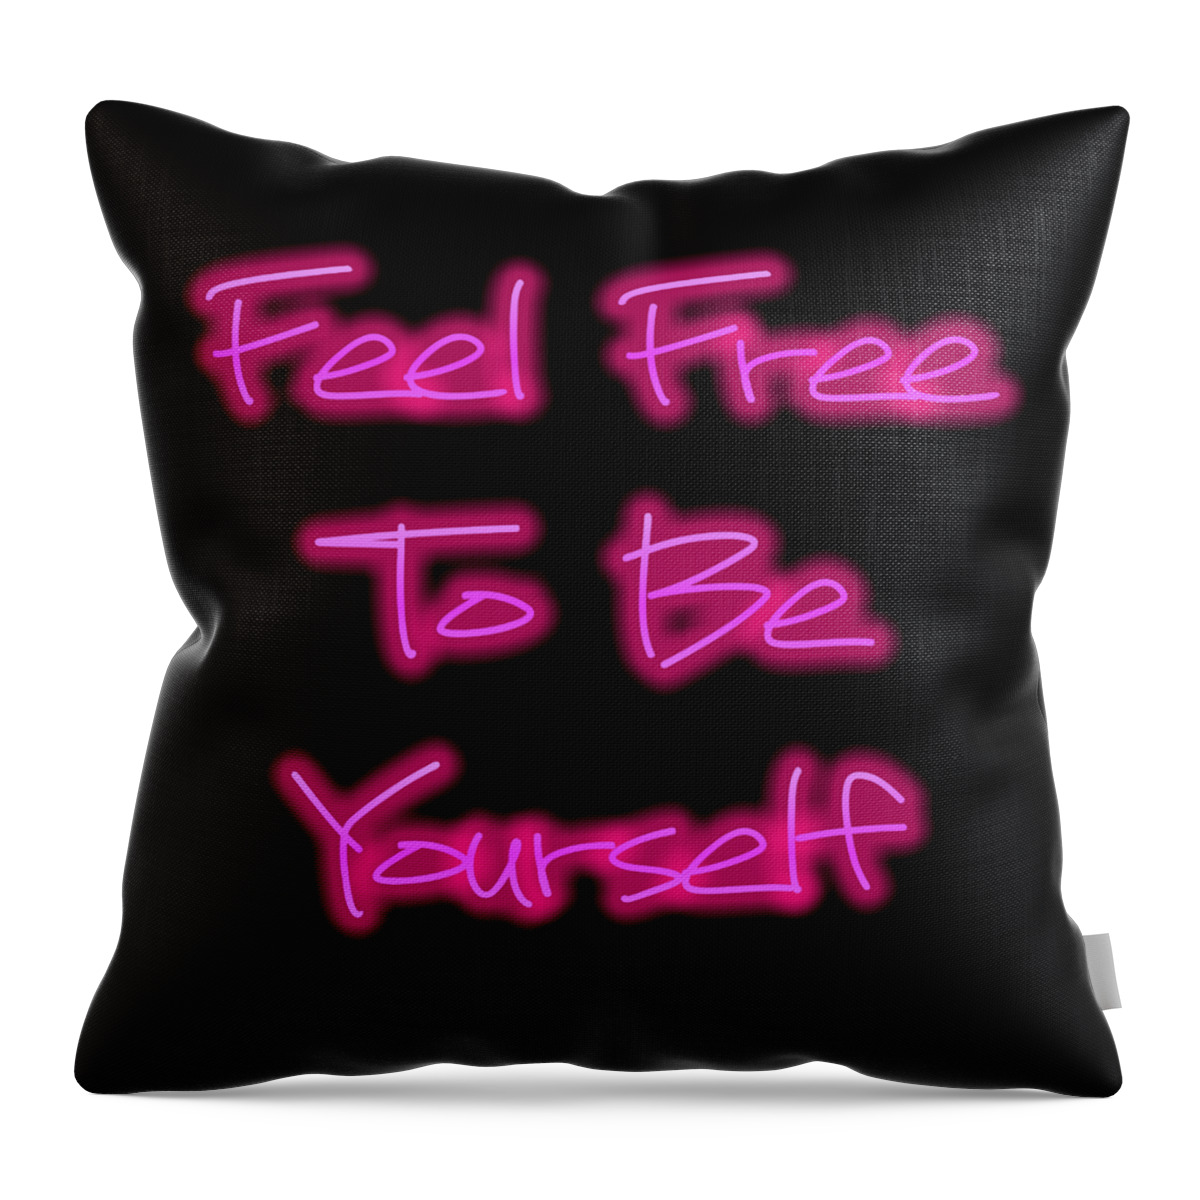 You Throw Pillow featuring the digital art Free To Be Yourself  by Rachel Hannah